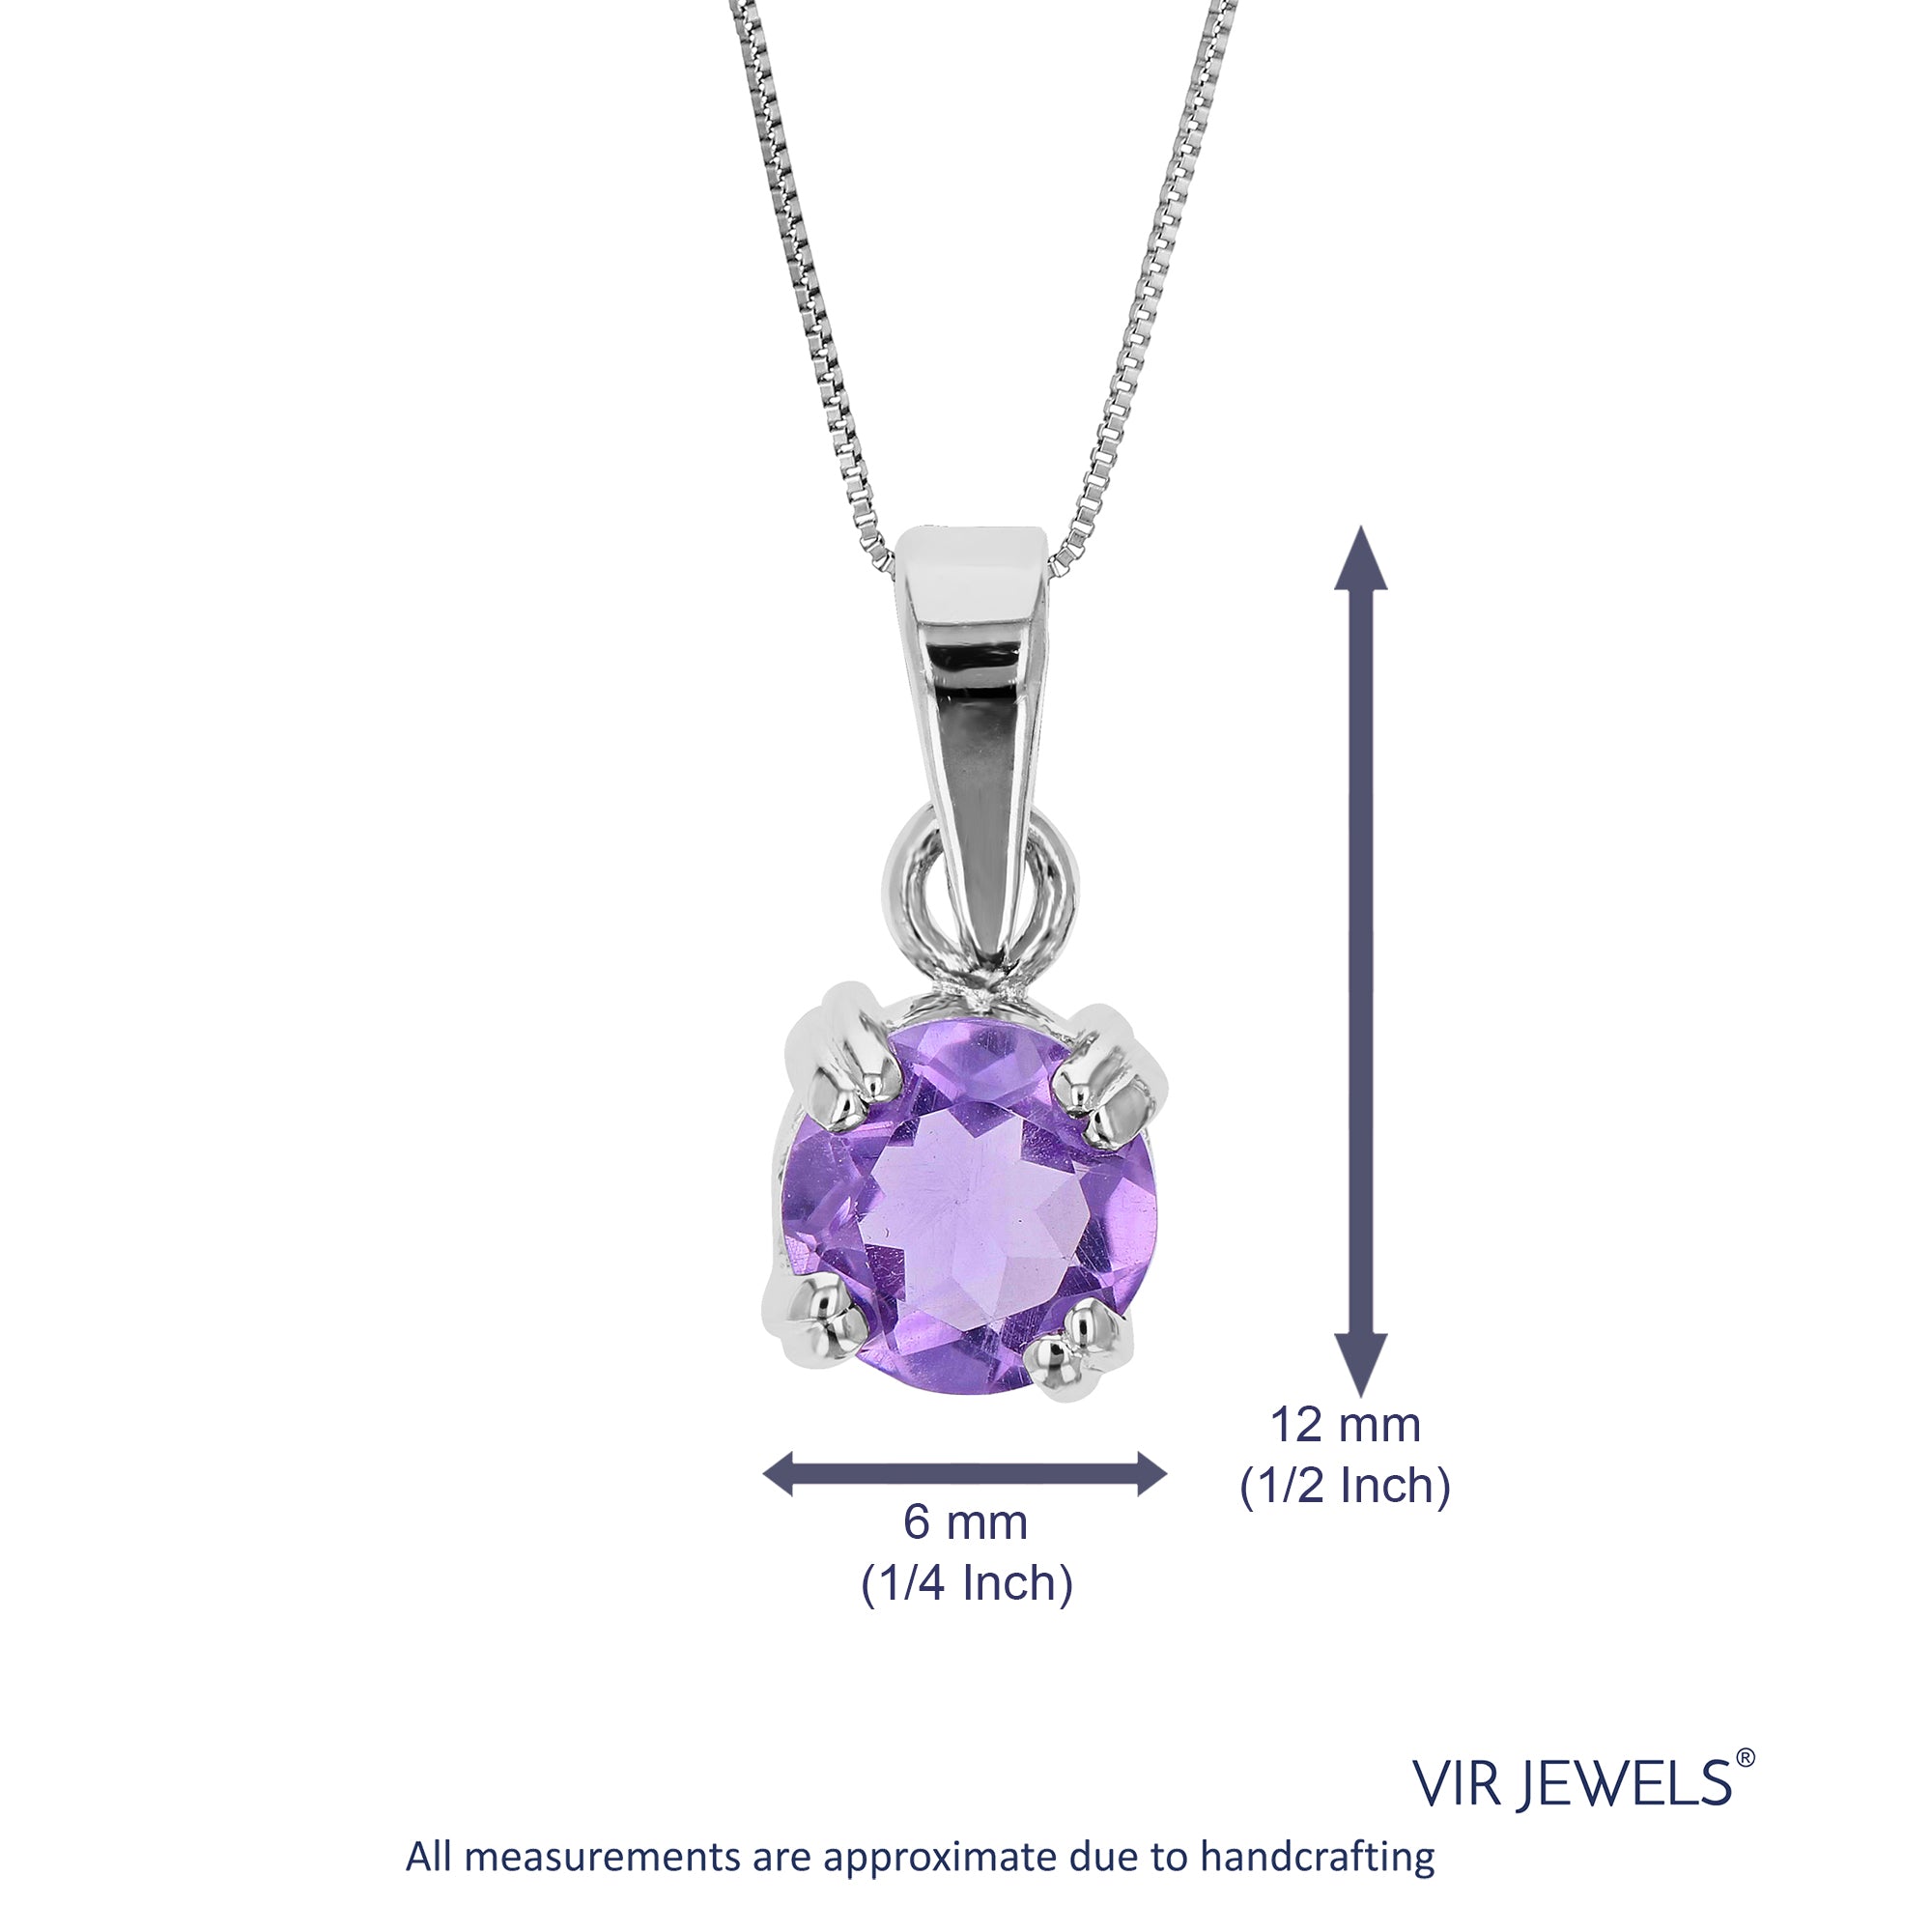 3/4 cttw Pendant Necklace, Purple Amethyst Pendant Necklace for Women in .925 Sterling Silver with Rhodium, 18 Inch Chain, Prong Setting